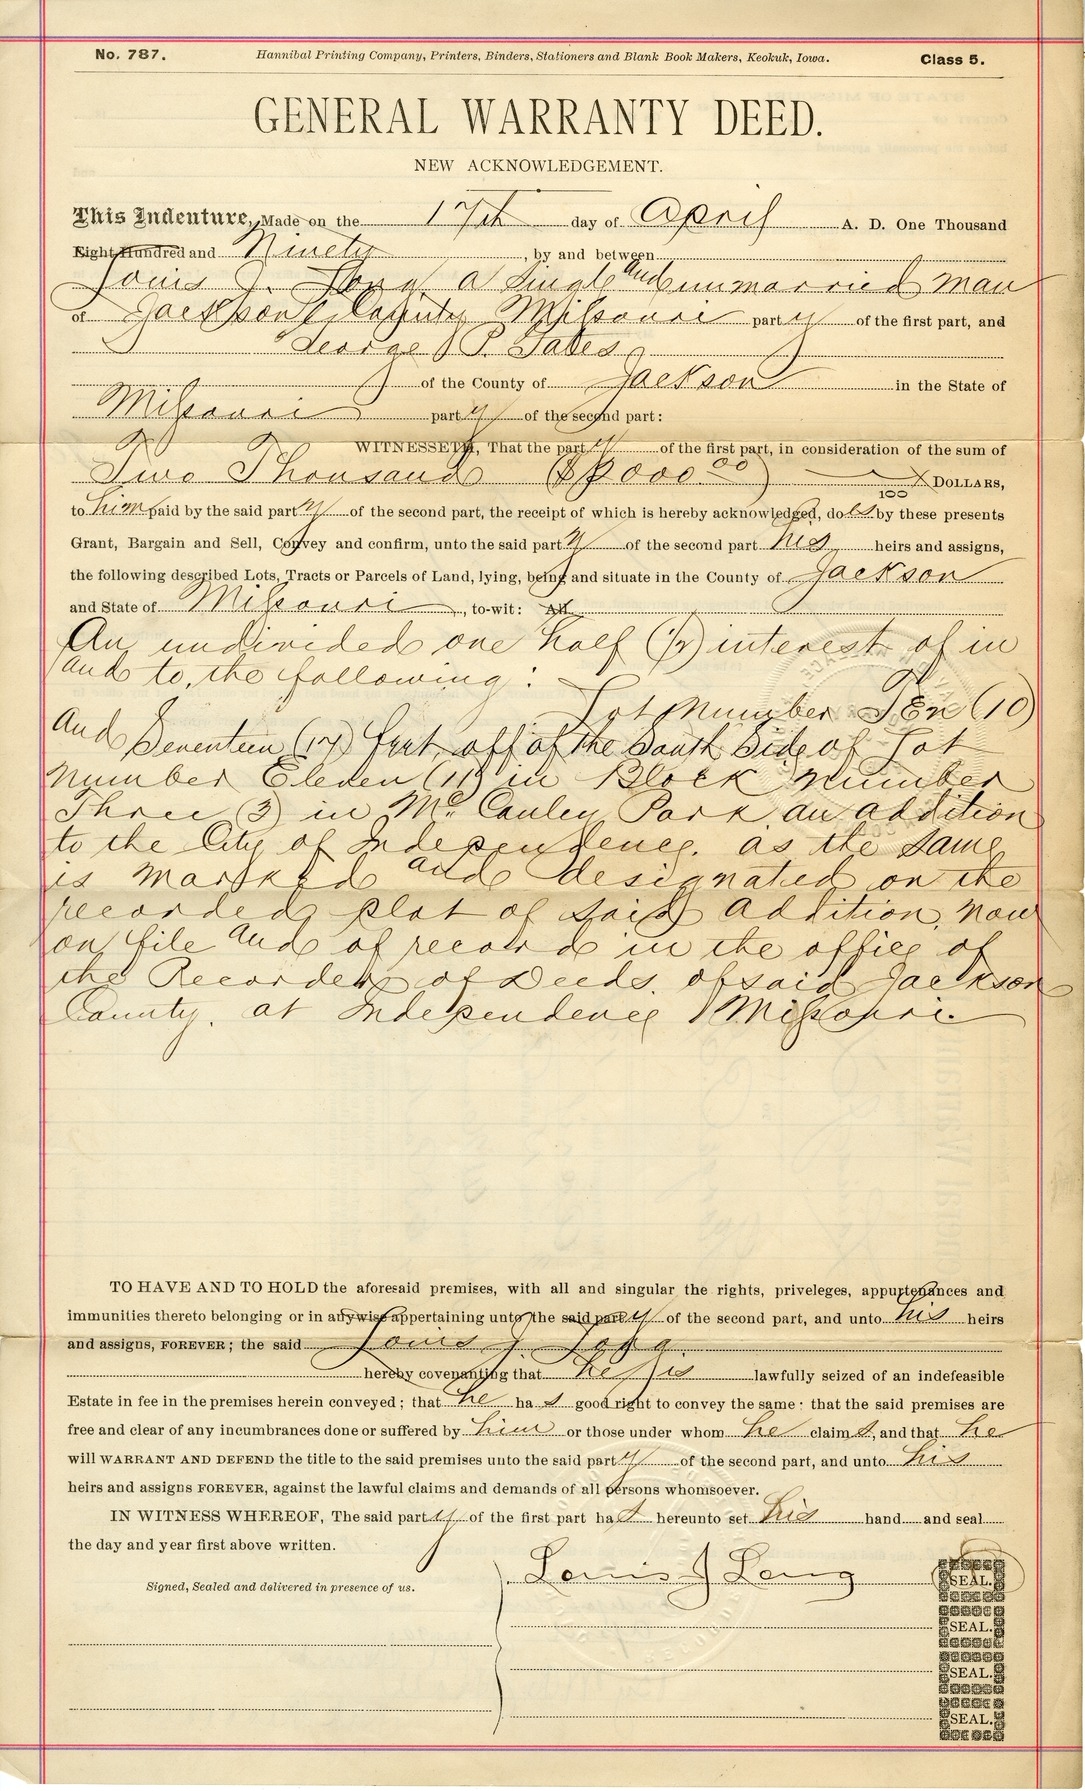 General Warranty Deed from Louis J. Long to George P. Gates